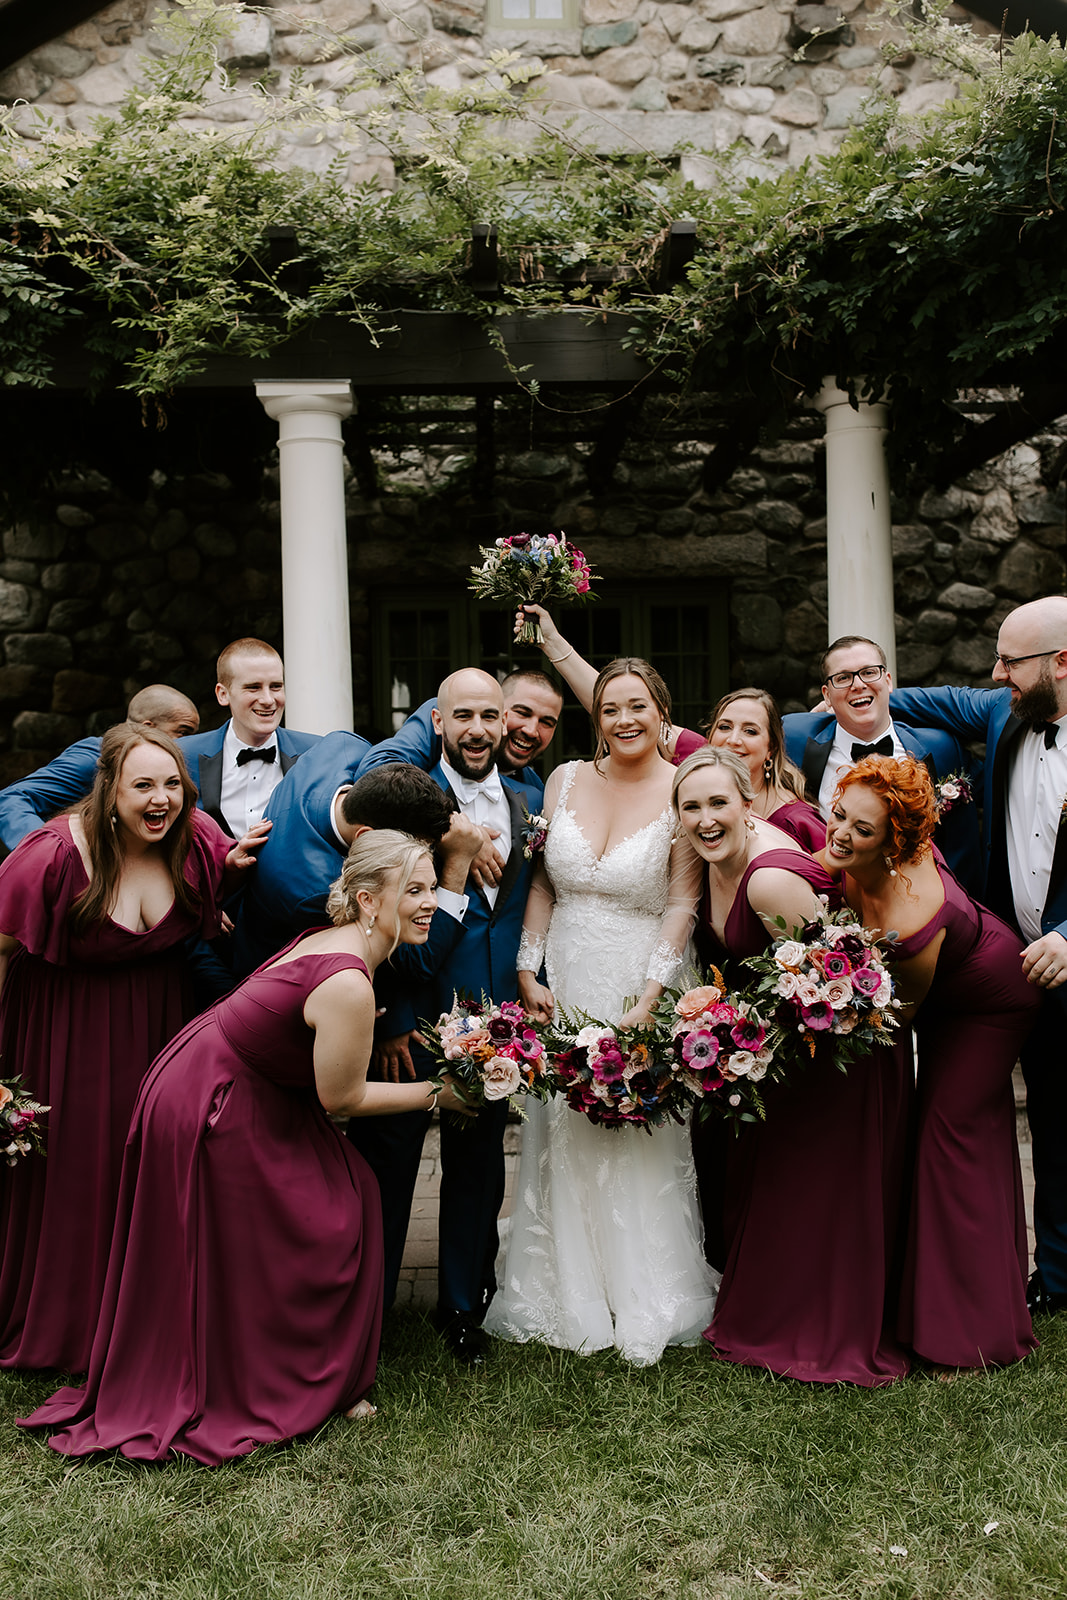 the whole wedding party poses together as everyone cheers